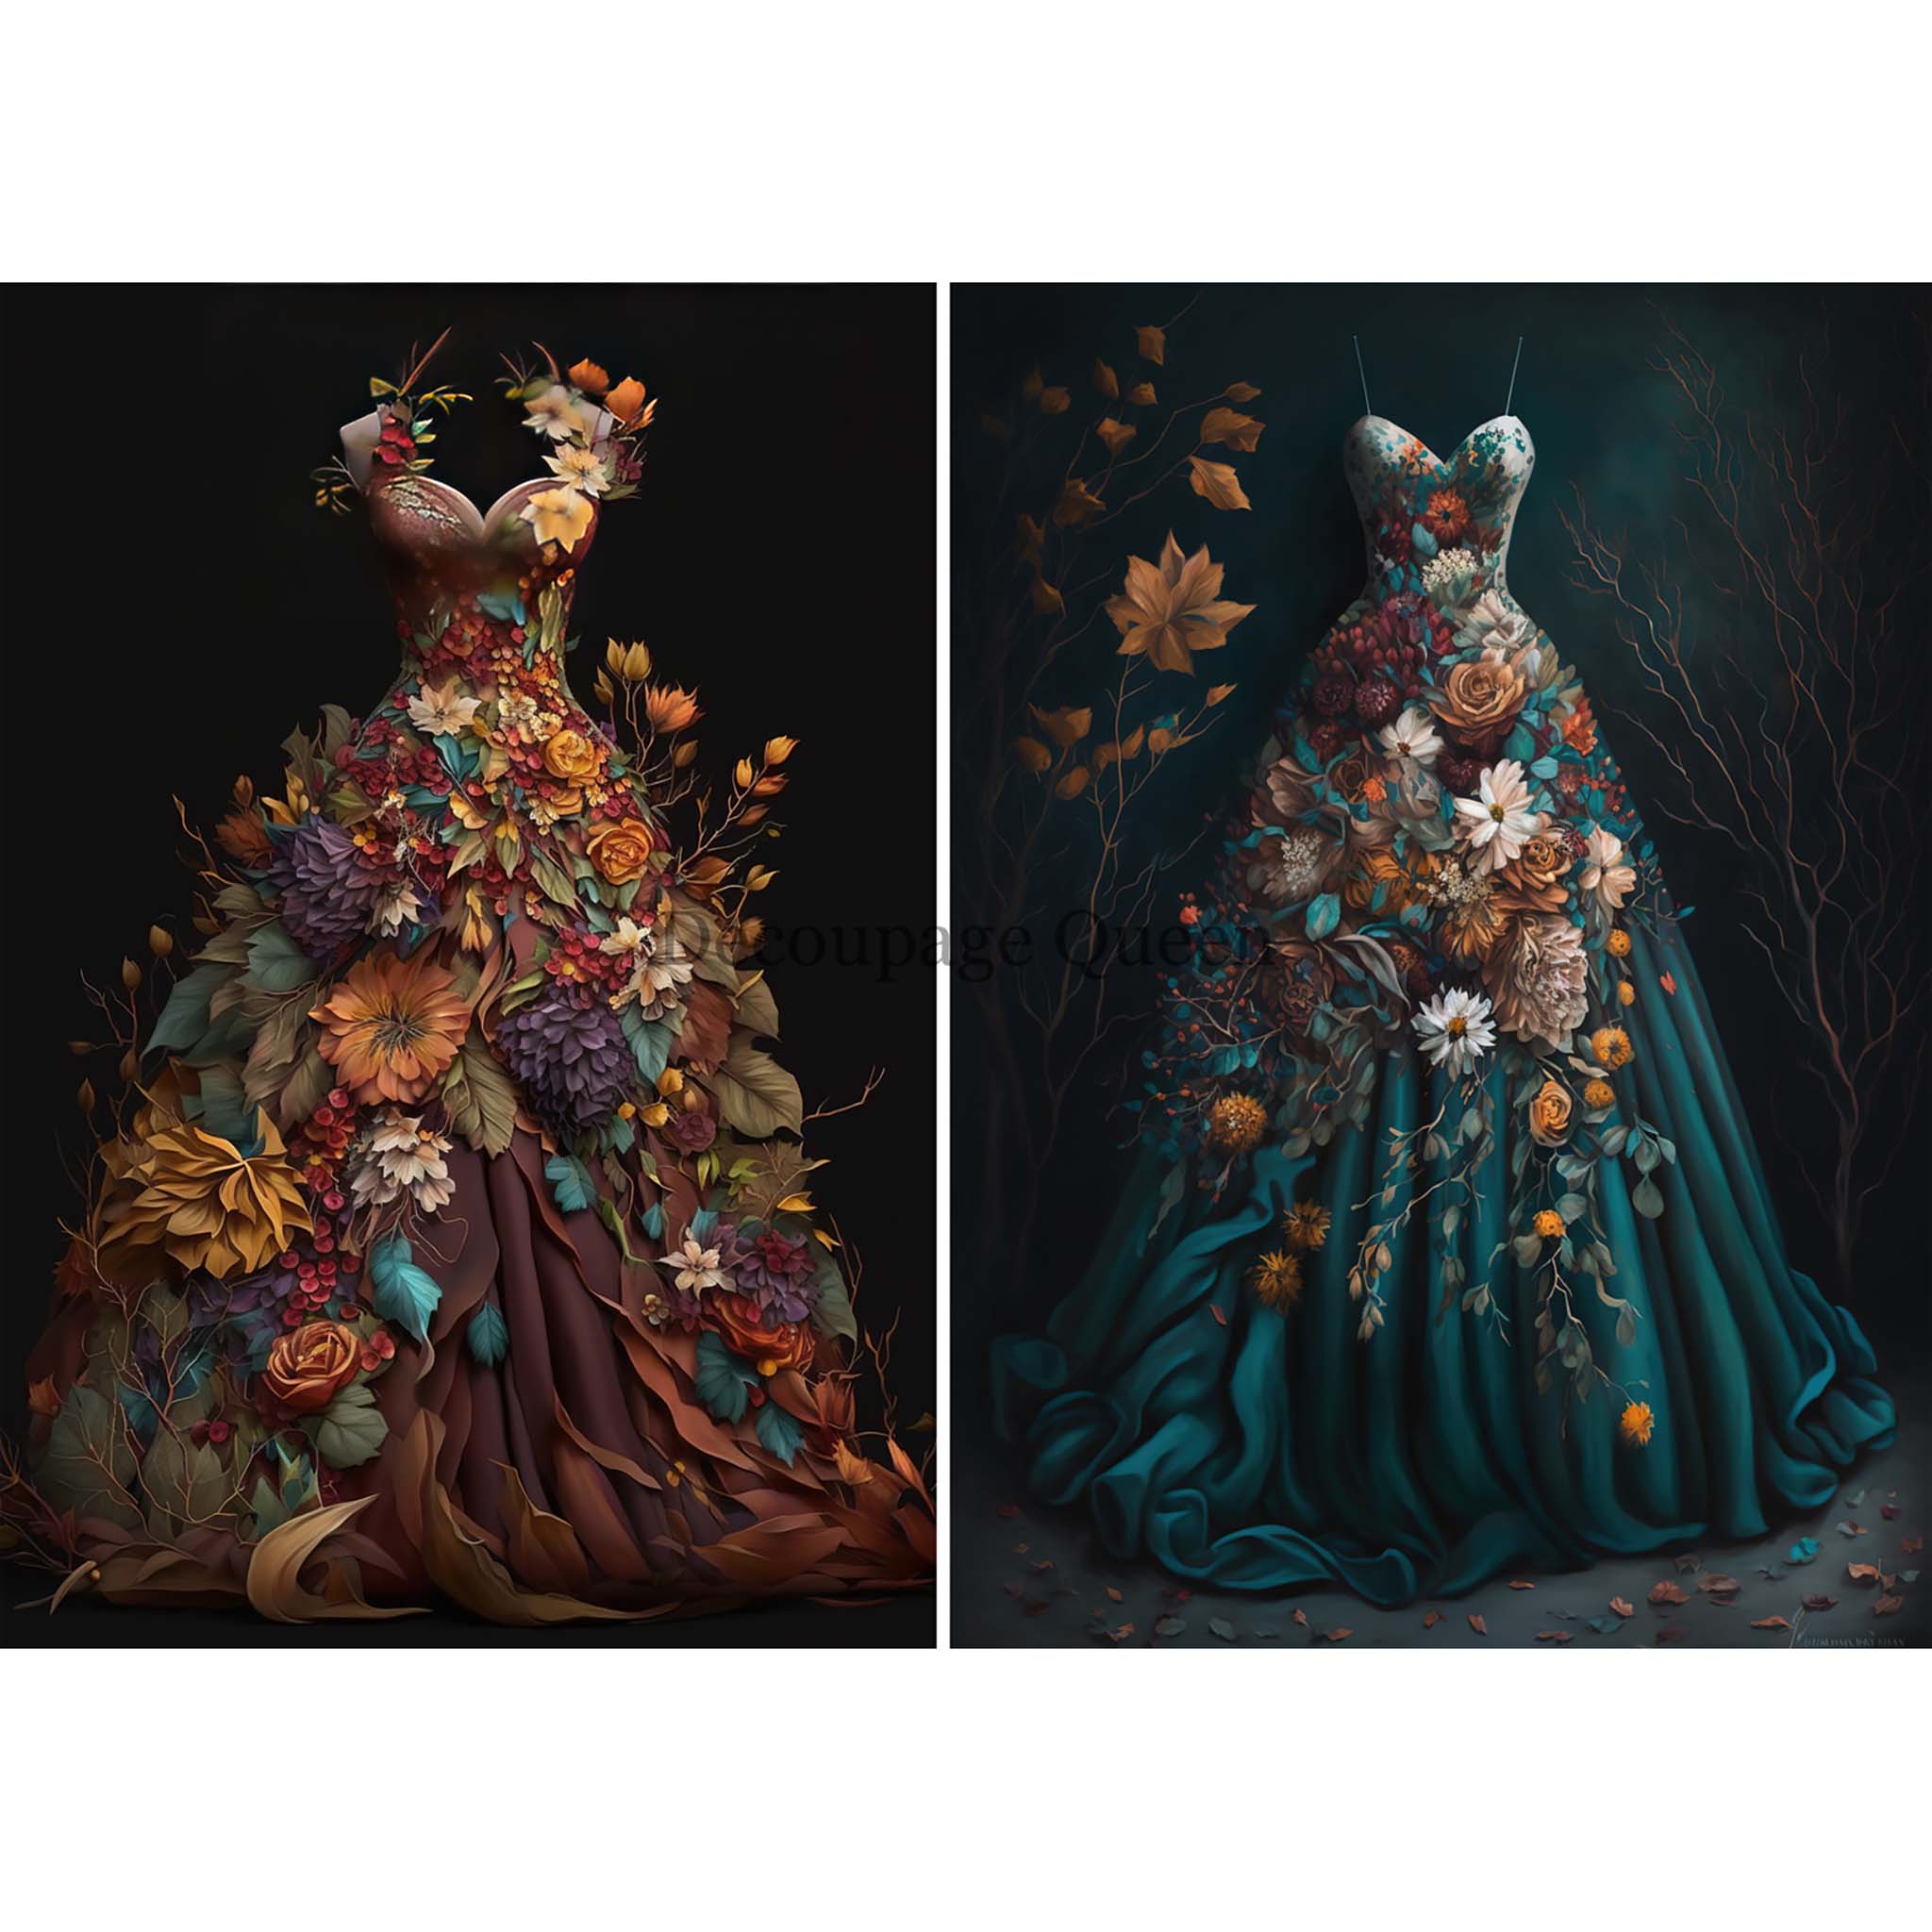 A1 rice paper design that features 2 evening gowns. The gown on the left is maroon and orange and the gown on the right is dark teal. Both are covered in autumn flowers and foliage. White borders are on the top and bottom.